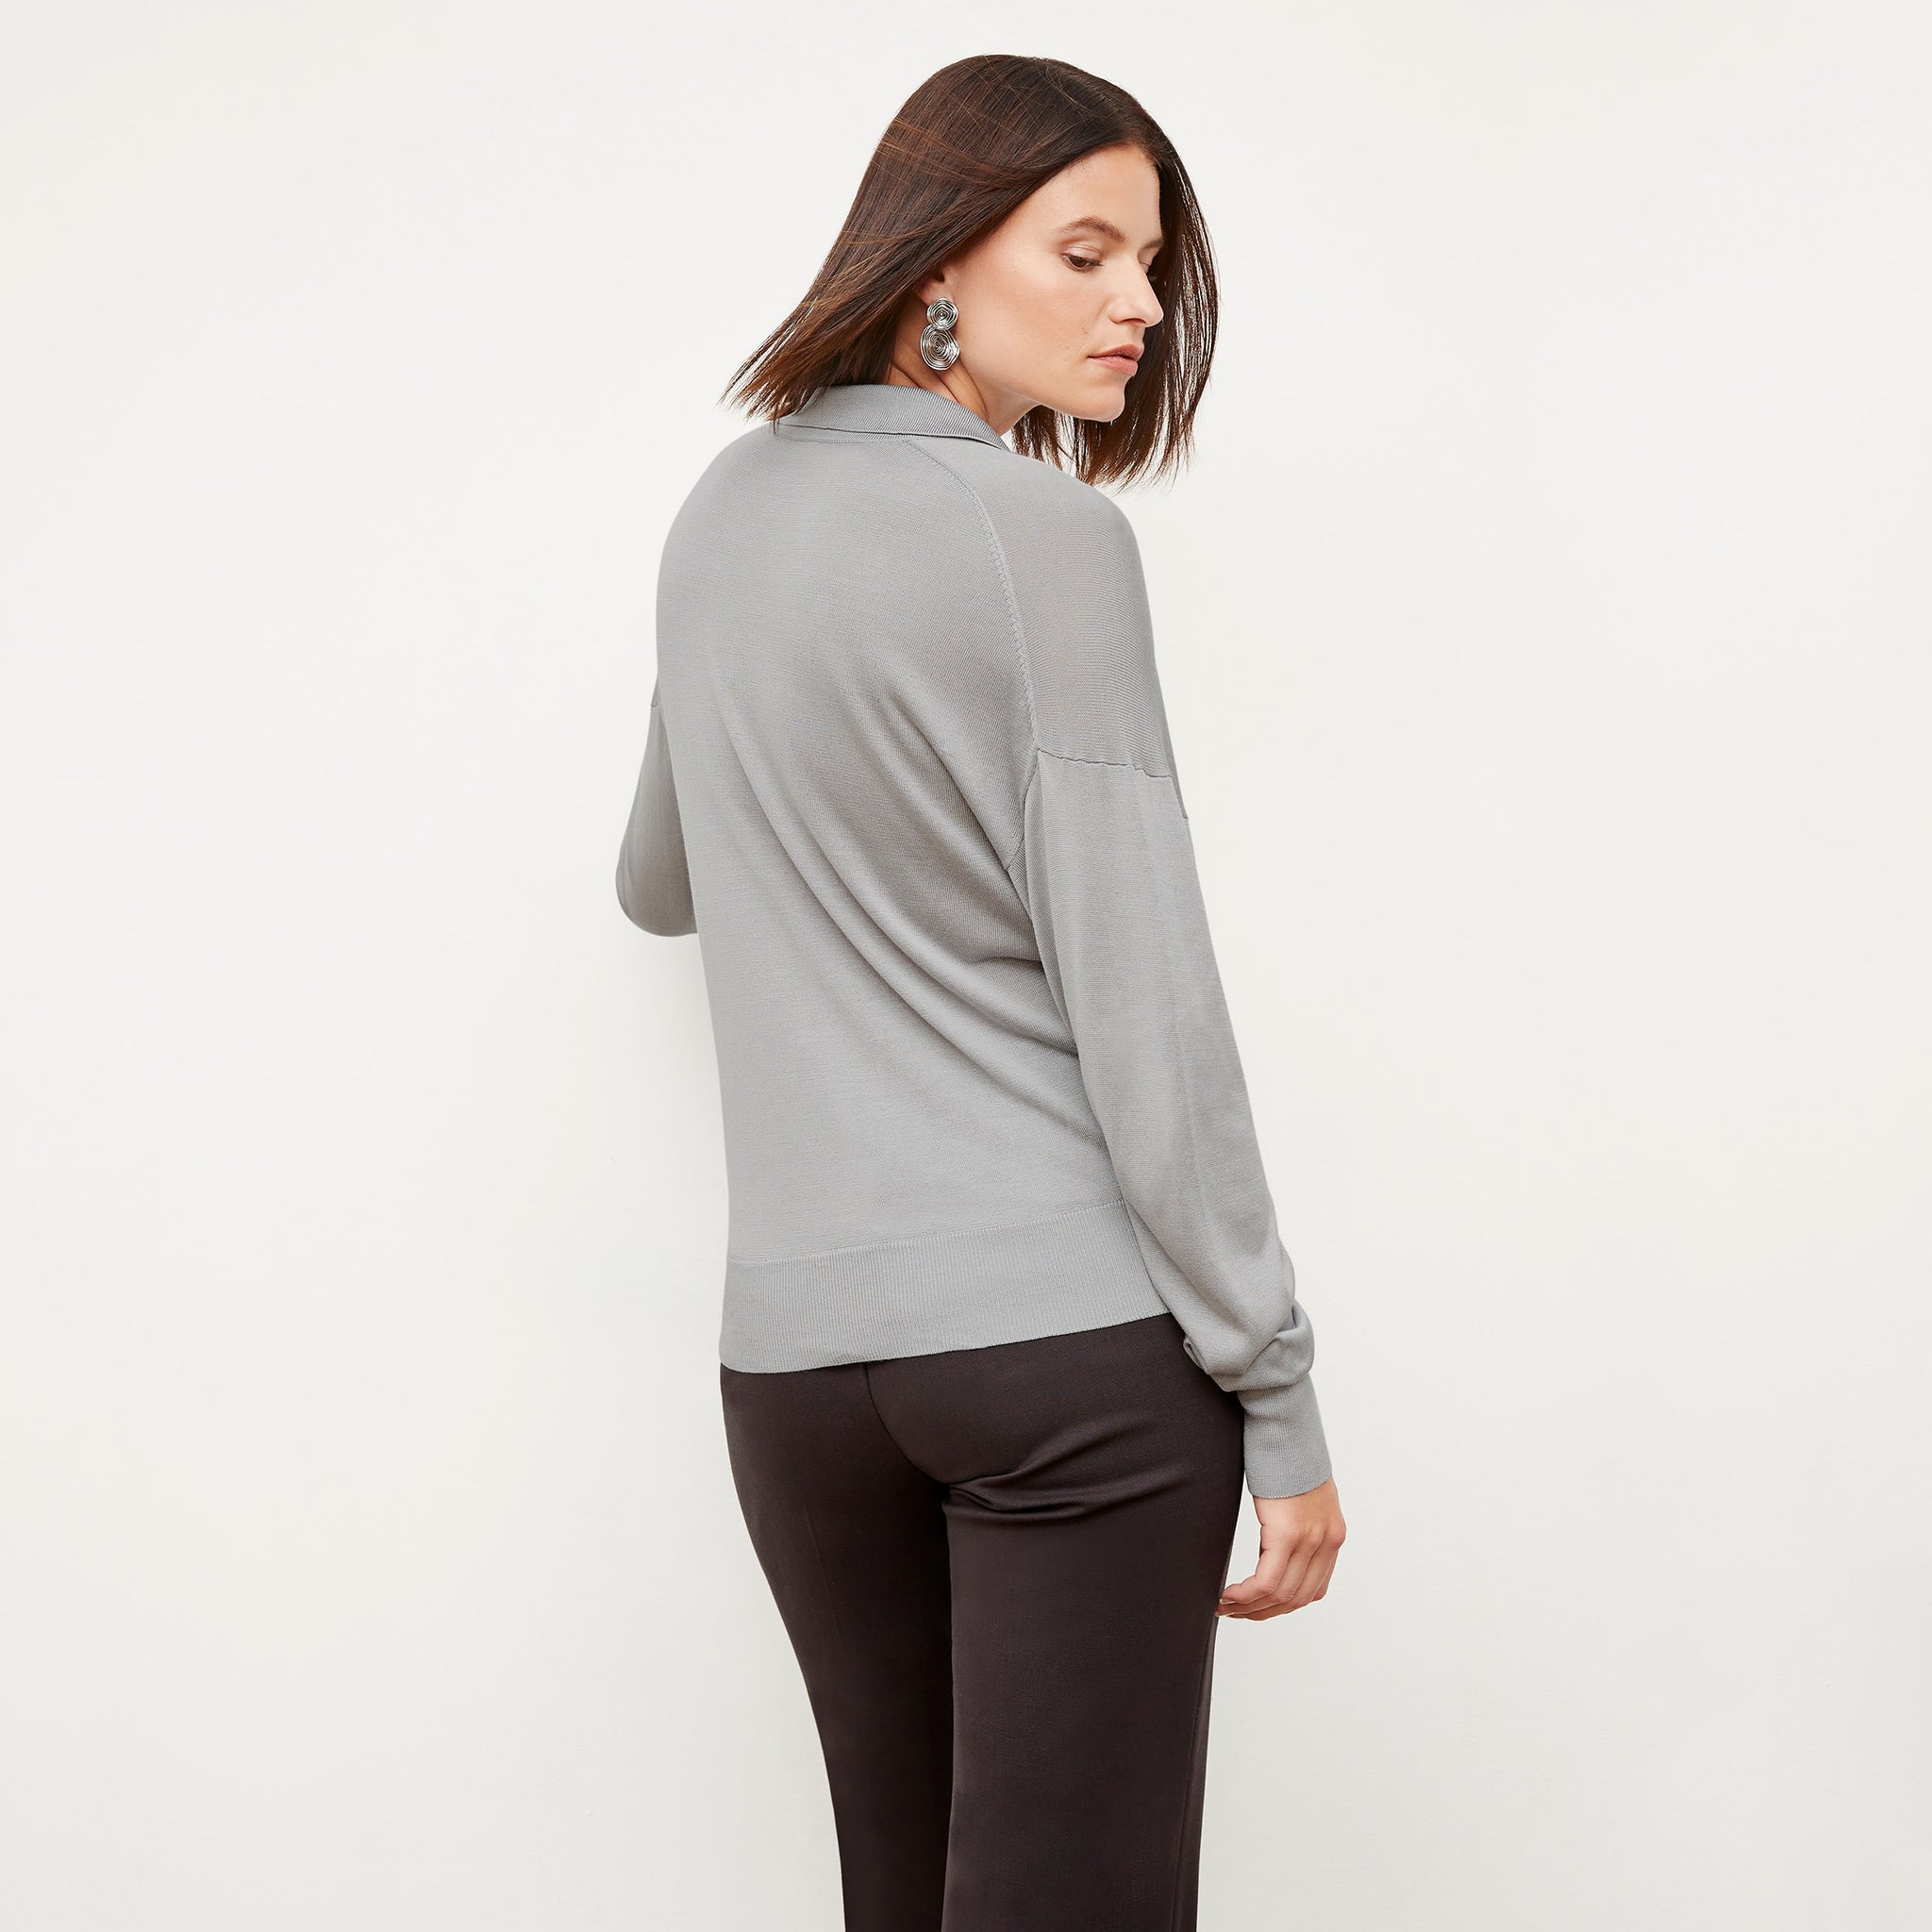 Back image of a woman standing wearing the leo top in silk jersey in pale gray